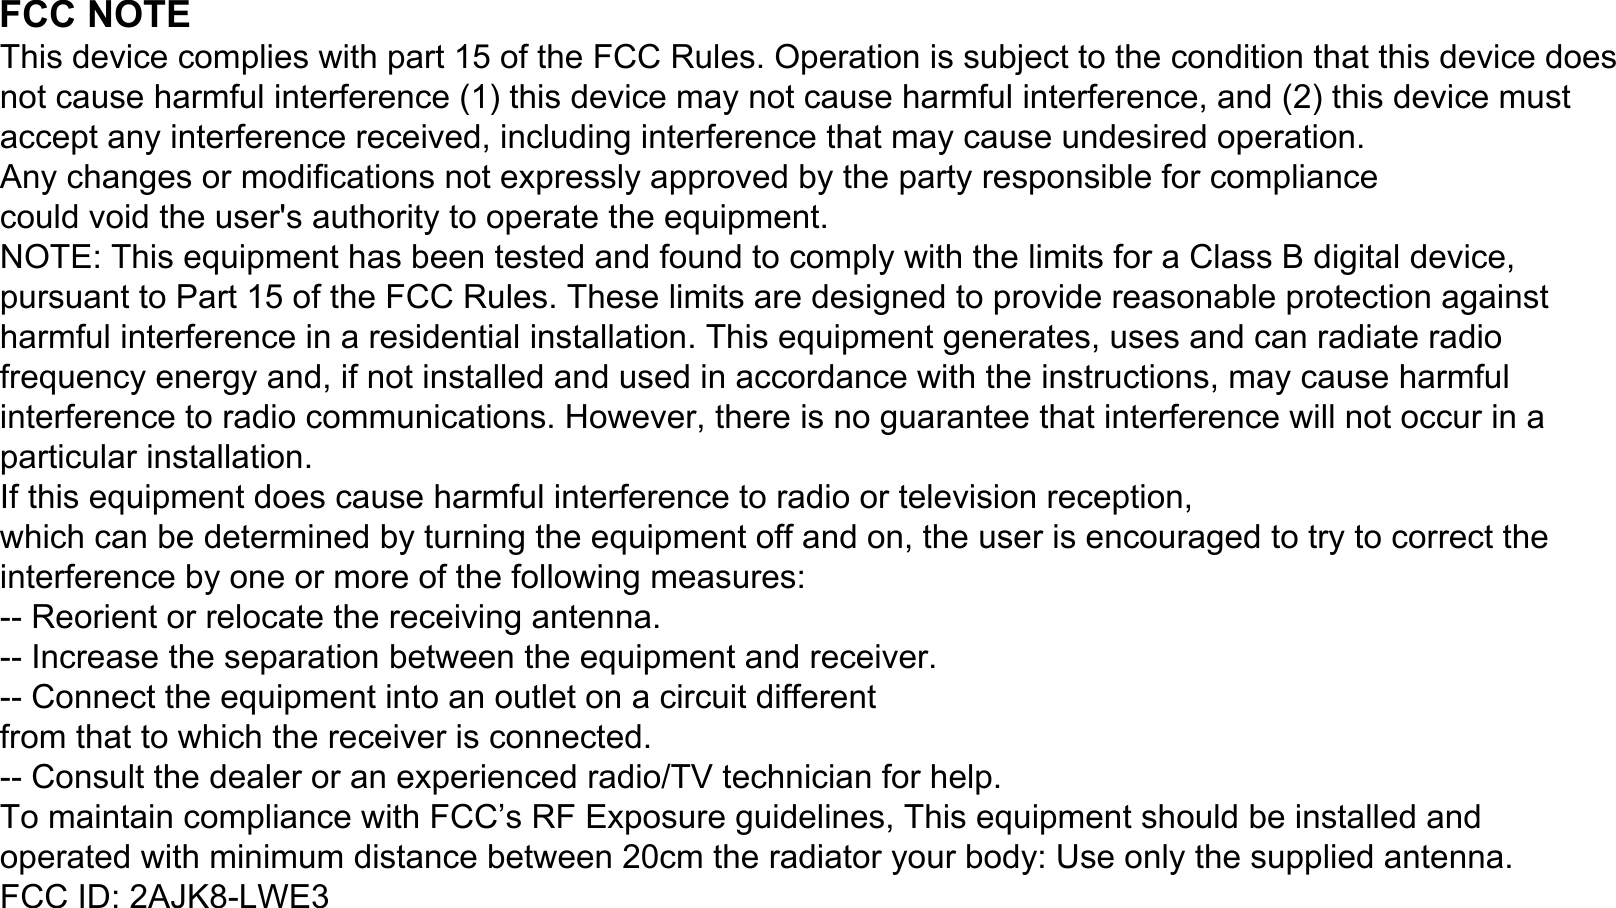 FCC NOTEThis device complies with part 15 of the FCC Rules. Operation is subject to the condition that this device does not cause harmful interference (1) this device may not cause harmful interference, and (2) this device must accept any interference received, including interference that may cause undesired operation.Any changes or modifications not expressly approved by the party responsible for compliancecould void the user&apos;s authority to operate the equipment.NOTE: This equipment has been tested and found to comply with the limits for a Class B digital device, pursuant to Part 15 of the FCC Rules. These limits are designed to provide reasonable protection against harmful interference in a residential installation. This equipment generates, uses and can radiate radio frequency energy and, if not installed and used in accordance with the instructions, may cause harmful interference to radio communications. However, there is no guarantee that interference will not occur in a particular installation.If this equipment does cause harmful interference to radio or television reception,which can be determined by turning the equipment off and on, the user is encouraged to try to correct the interference by one or more of the following measures:-- Reorient or relocate the receiving antenna.-- Increase the separation between the equipment and receiver.-- Connect the equipment into an outlet on a circuit differentfrom that to which the receiver is connected.-- Consult the dealer or an experienced radio/TV technician for help.To maintain compliance with FCC’s RF Exposure guidelines, This equipment should be installed and operated with minimum distance between 20cm the radiator your body: Use only the supplied antenna.FCC ID: 2AJK8-LWE3